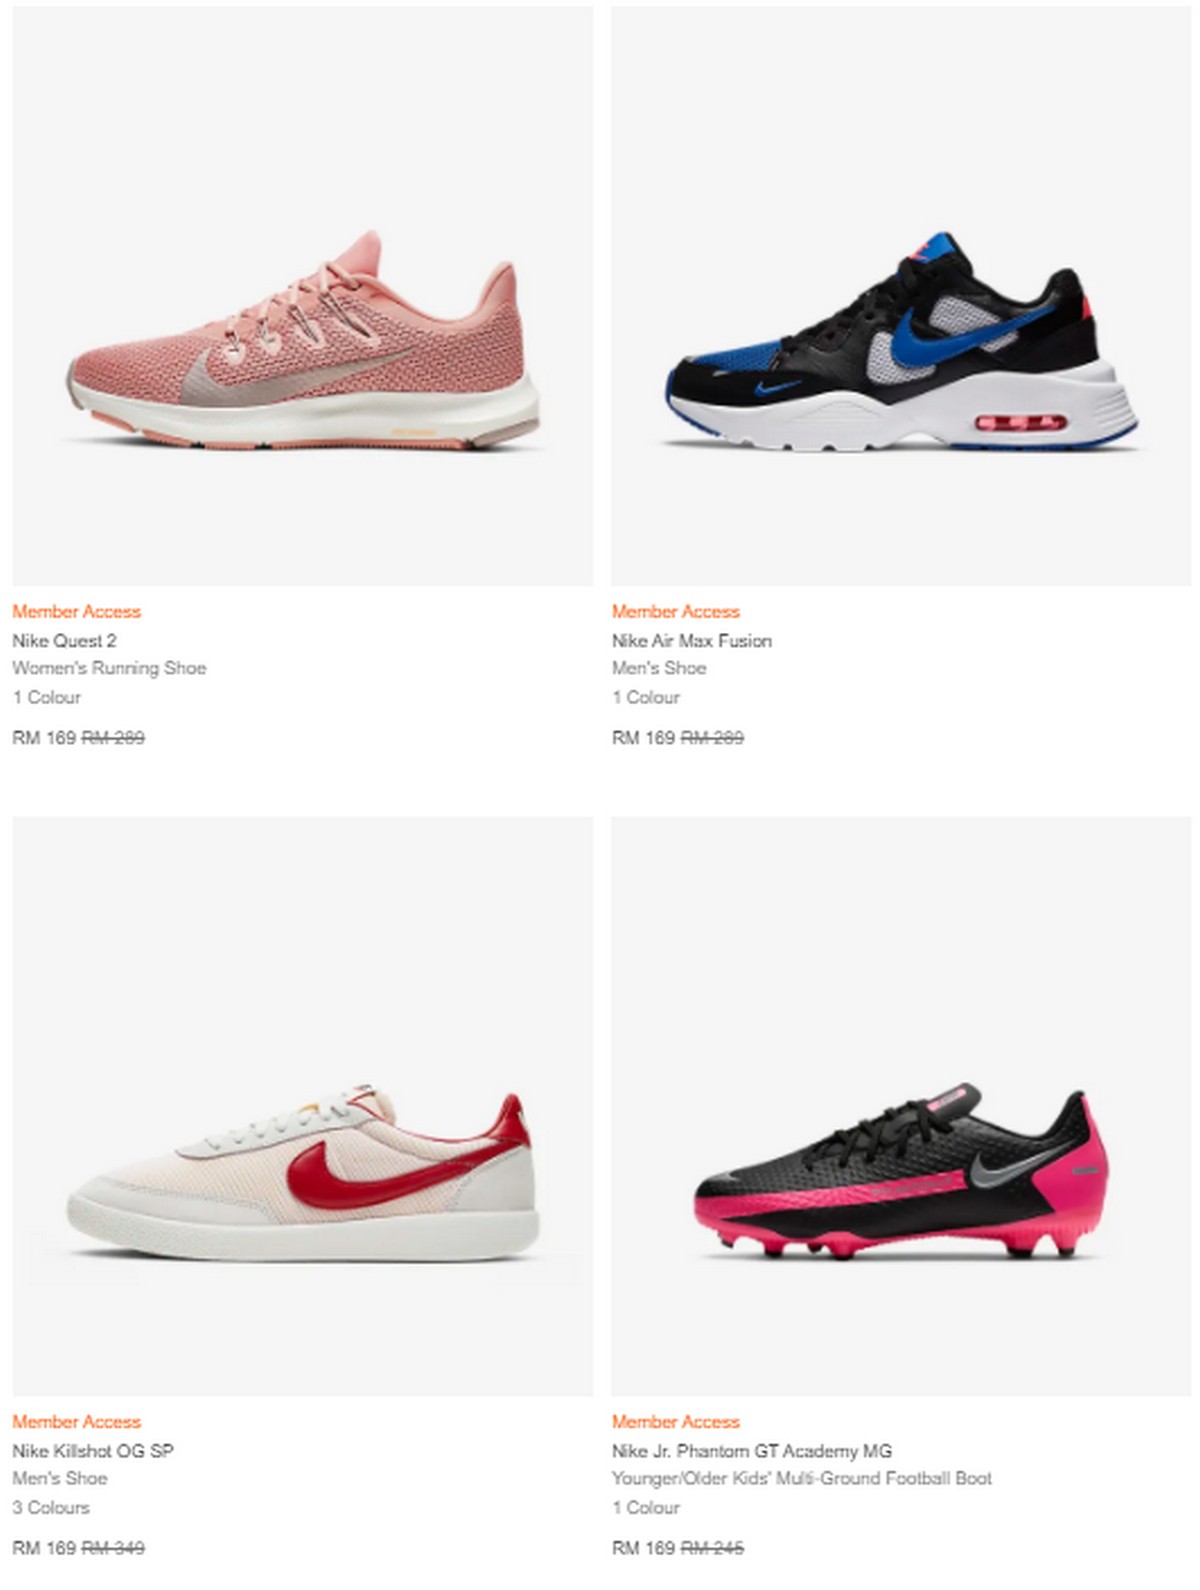 nike-11-11-preview-offer-new-4 - LifeStyle 